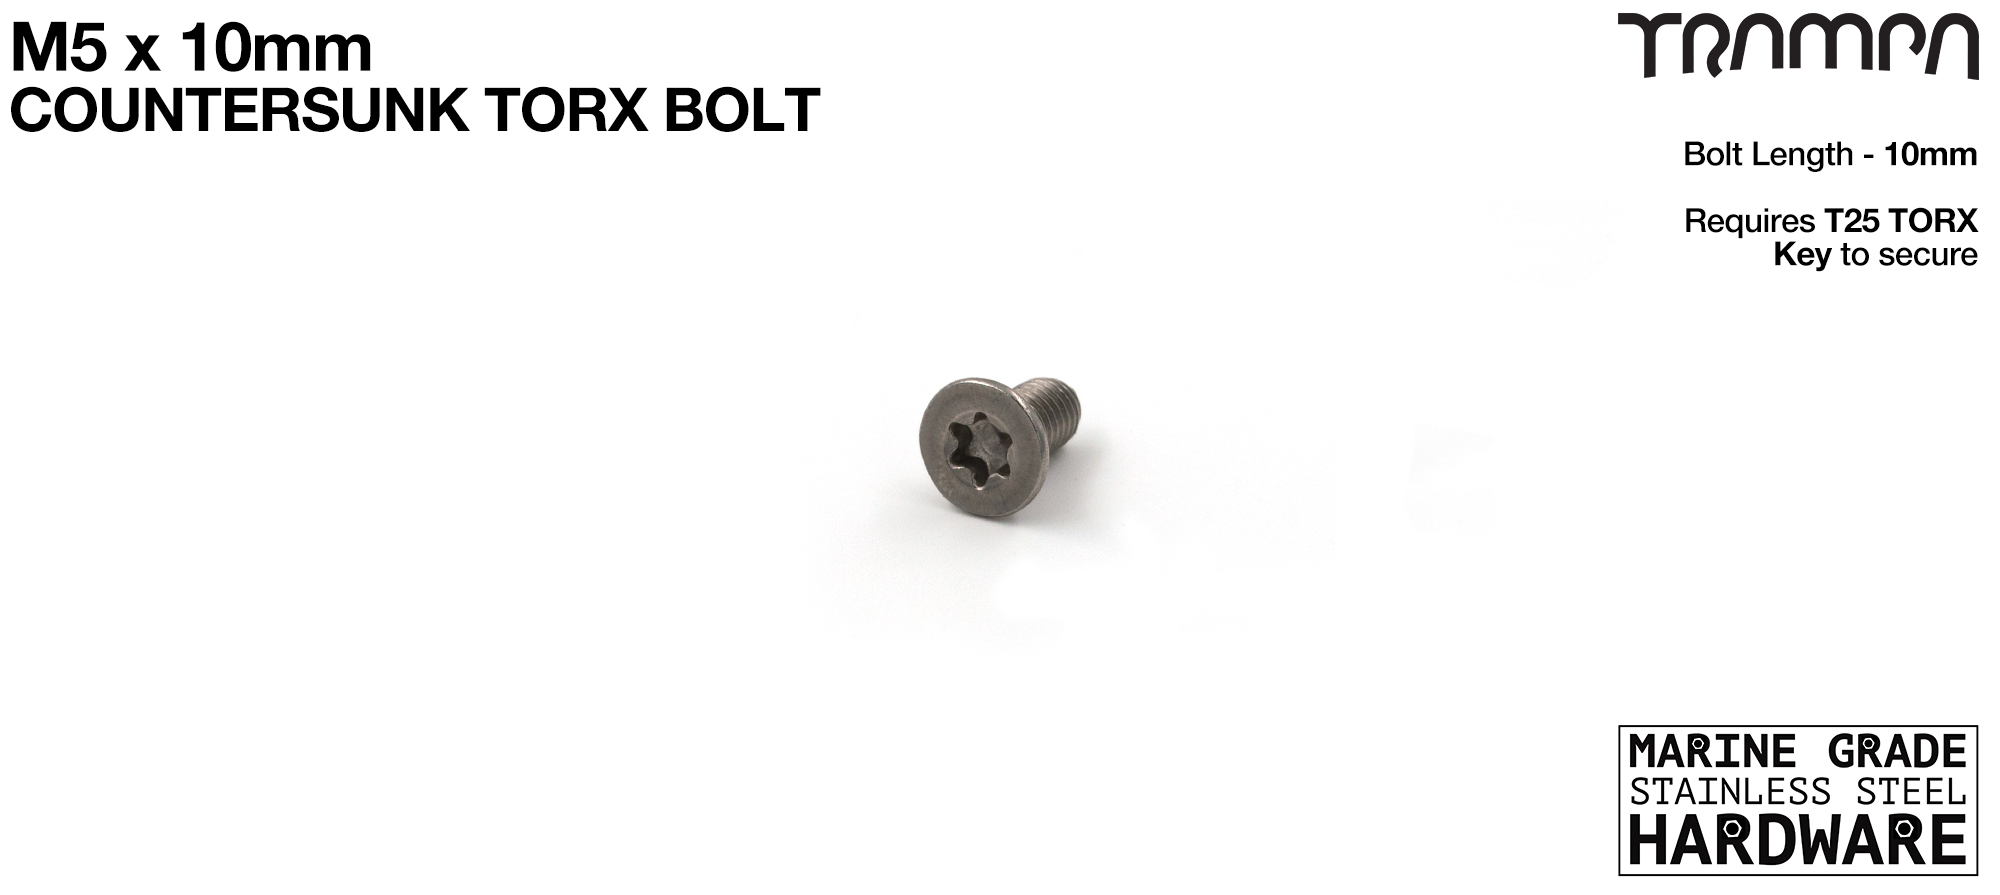 M5 x 10mm TORX Countersunk Bolt - Marine Grade Stainless steel with TORX Fitting